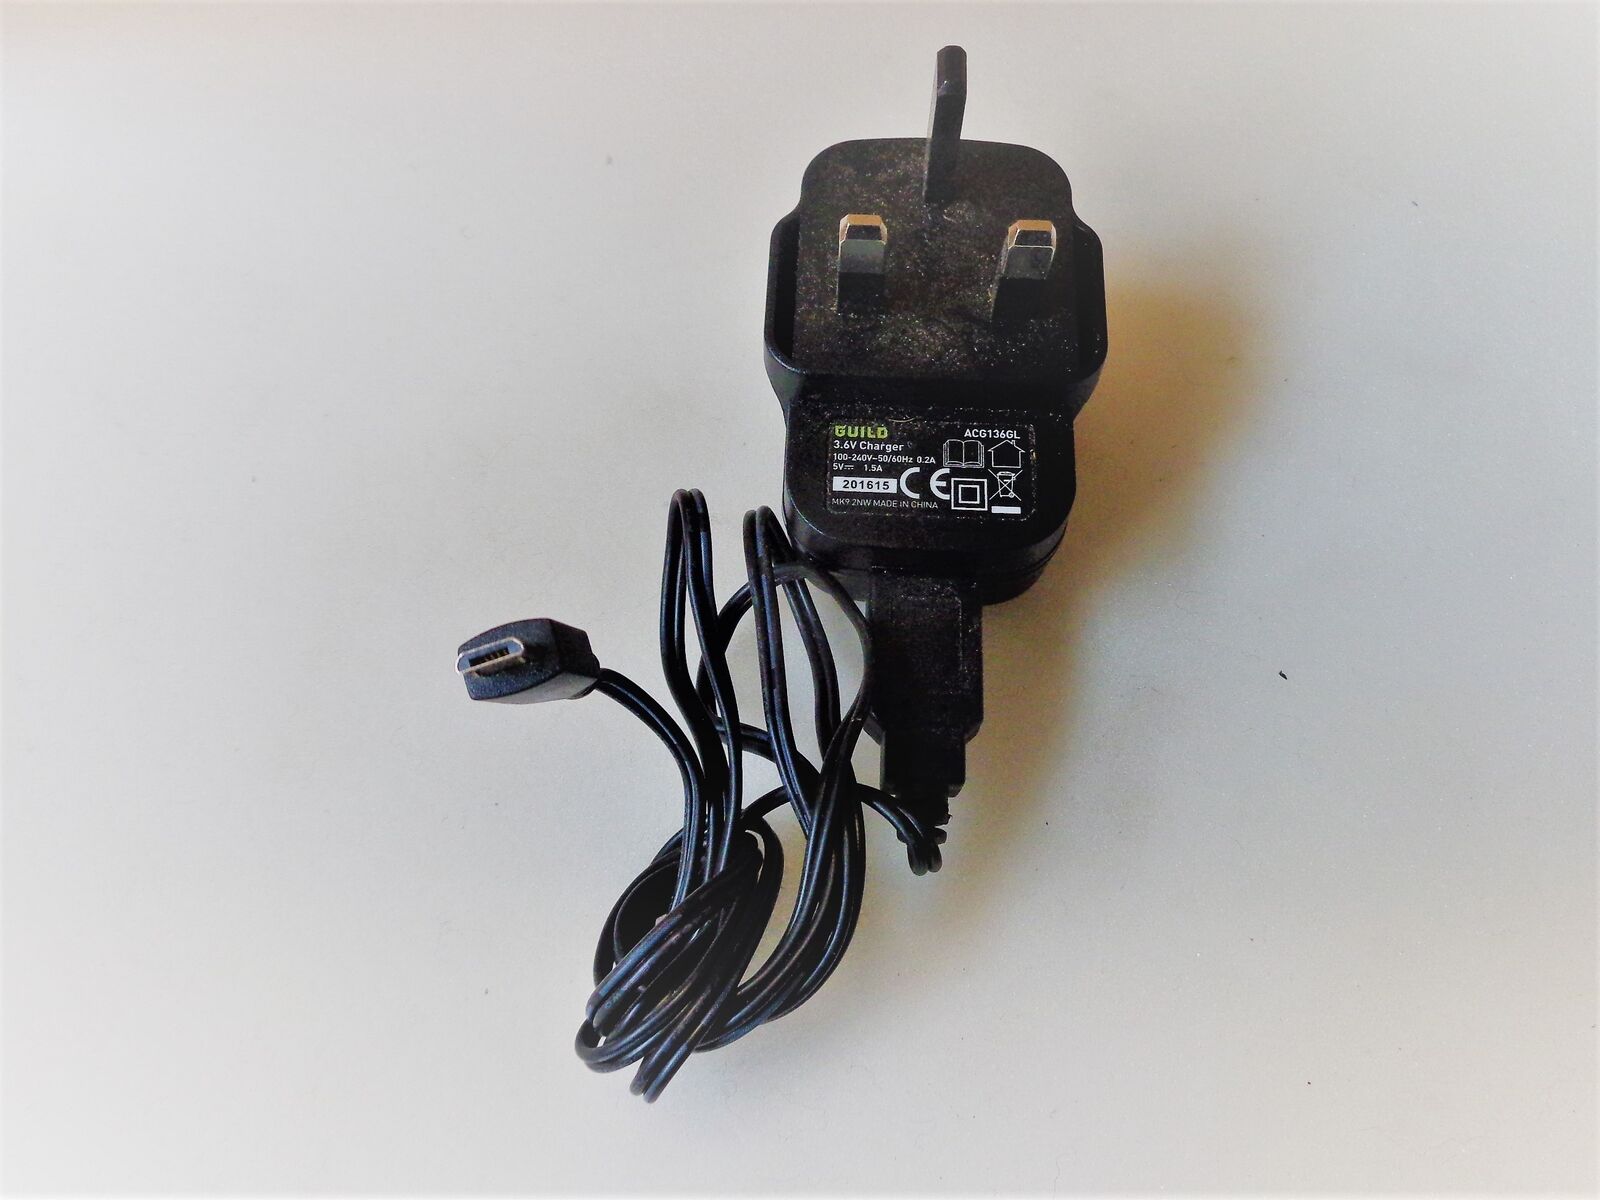 New Guild ACG136GL power Adapter 5V 1.5A AC DC Charger